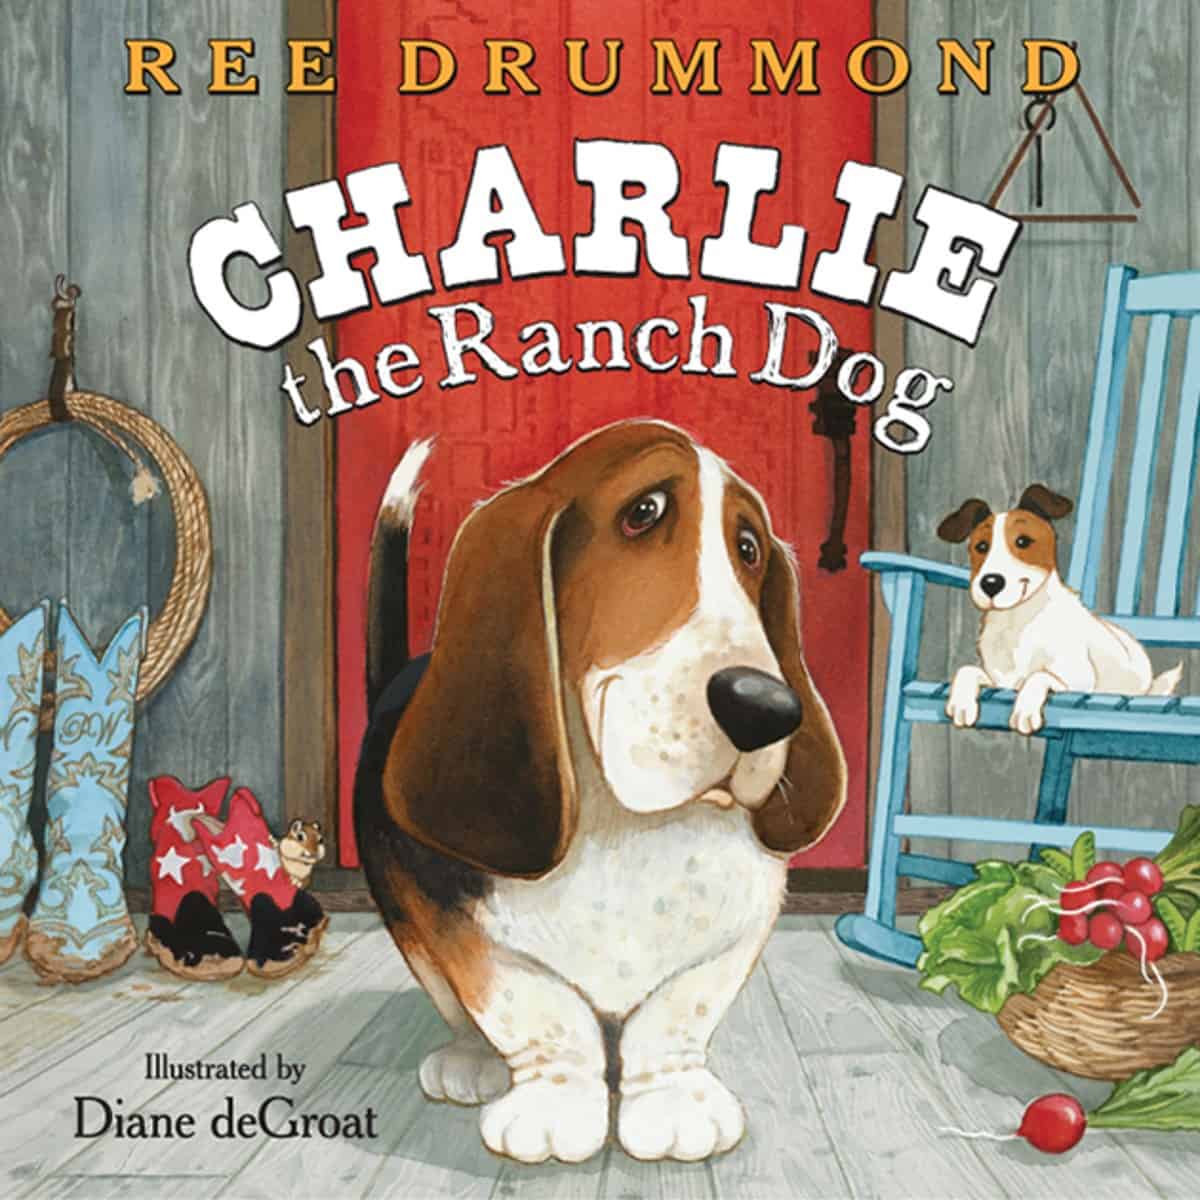 charlie the ranch dog books by Ree Drummond